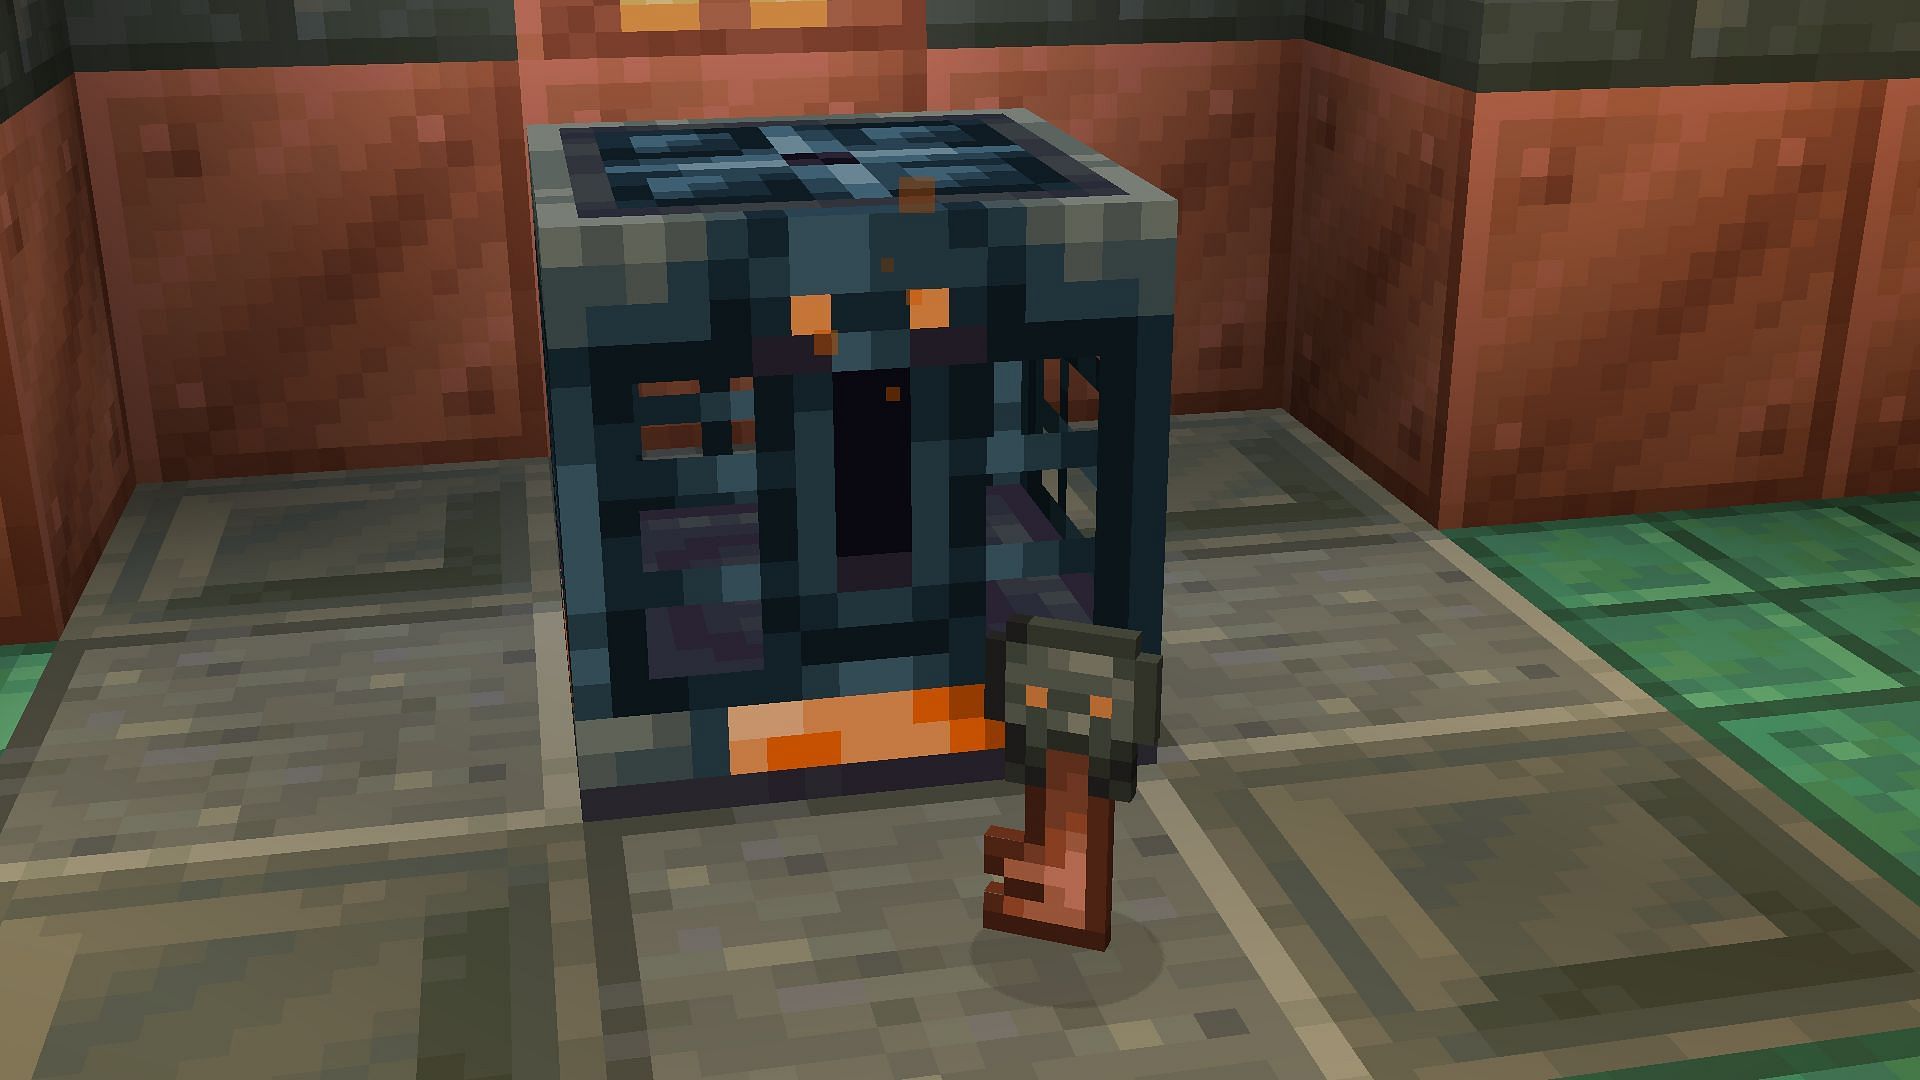 You need to find trial chambers, obtain trial key, and open vaults to find bolt armor trim (Image via Mojang Studios)